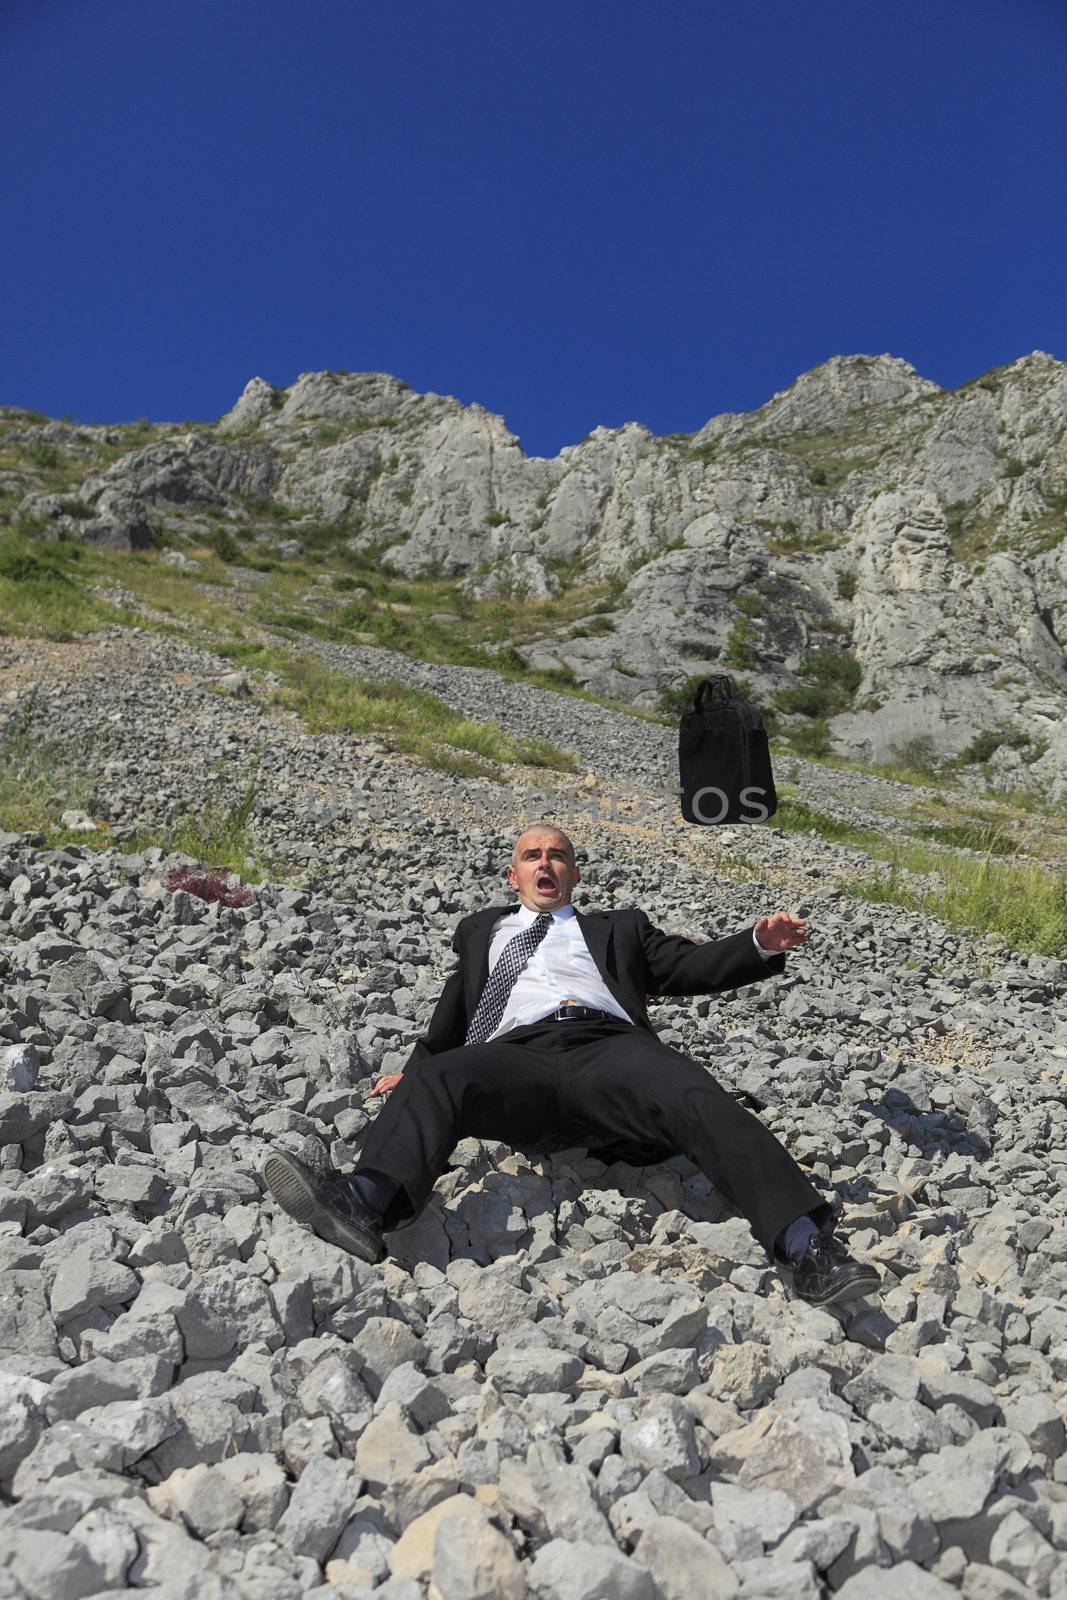 Image of a businessman in a difficult situation sliding on a rocky mountain slope.